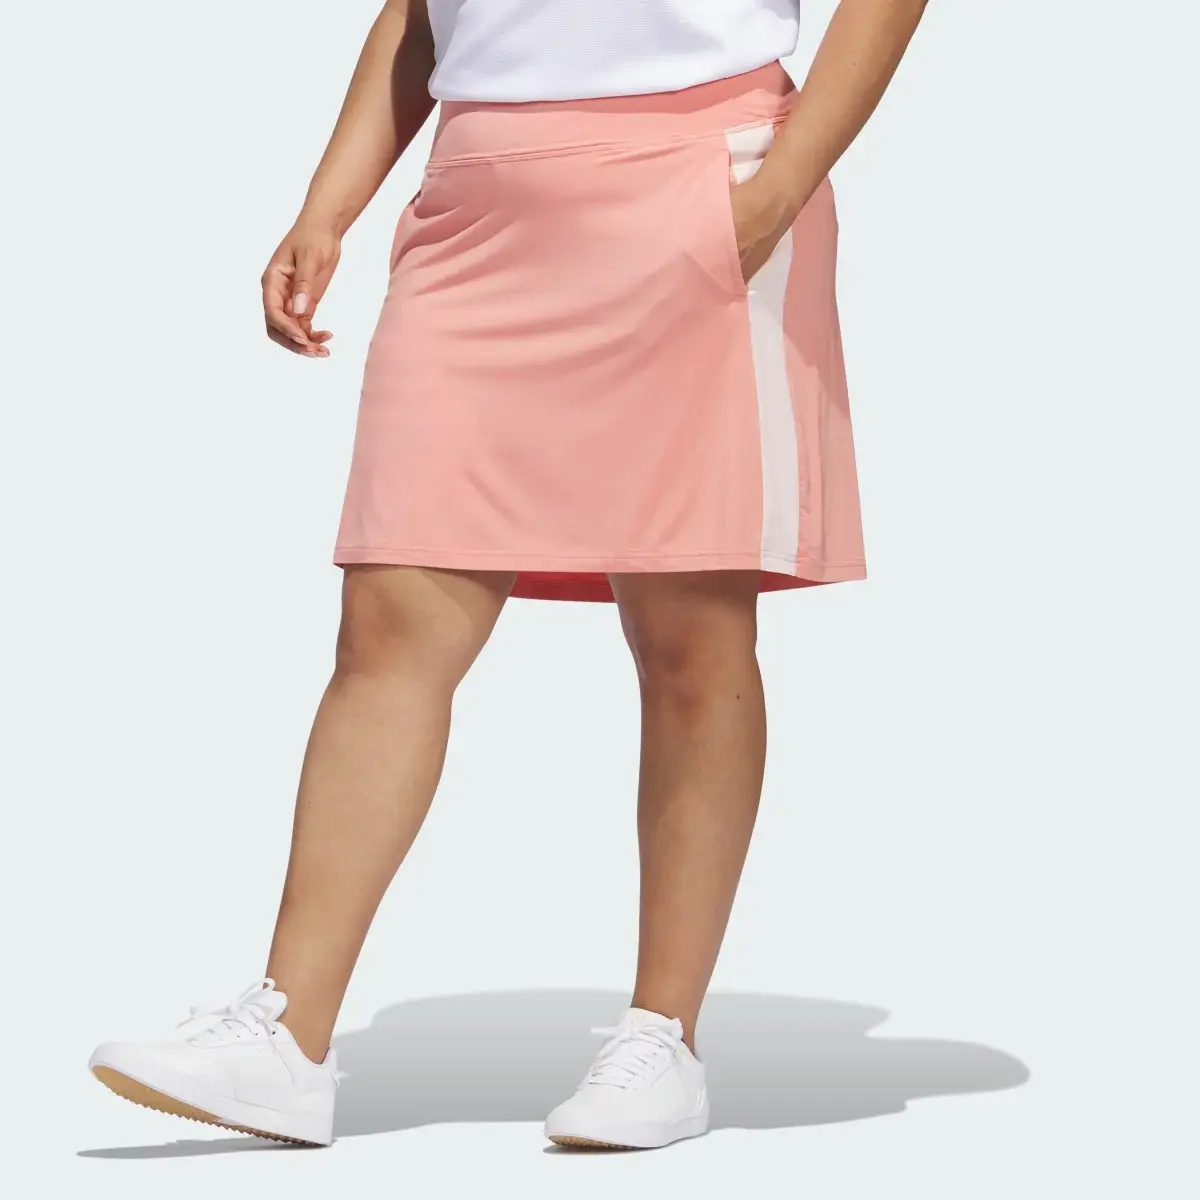 Adidas Made With Nature Golf Skirt (Plus Size). 1